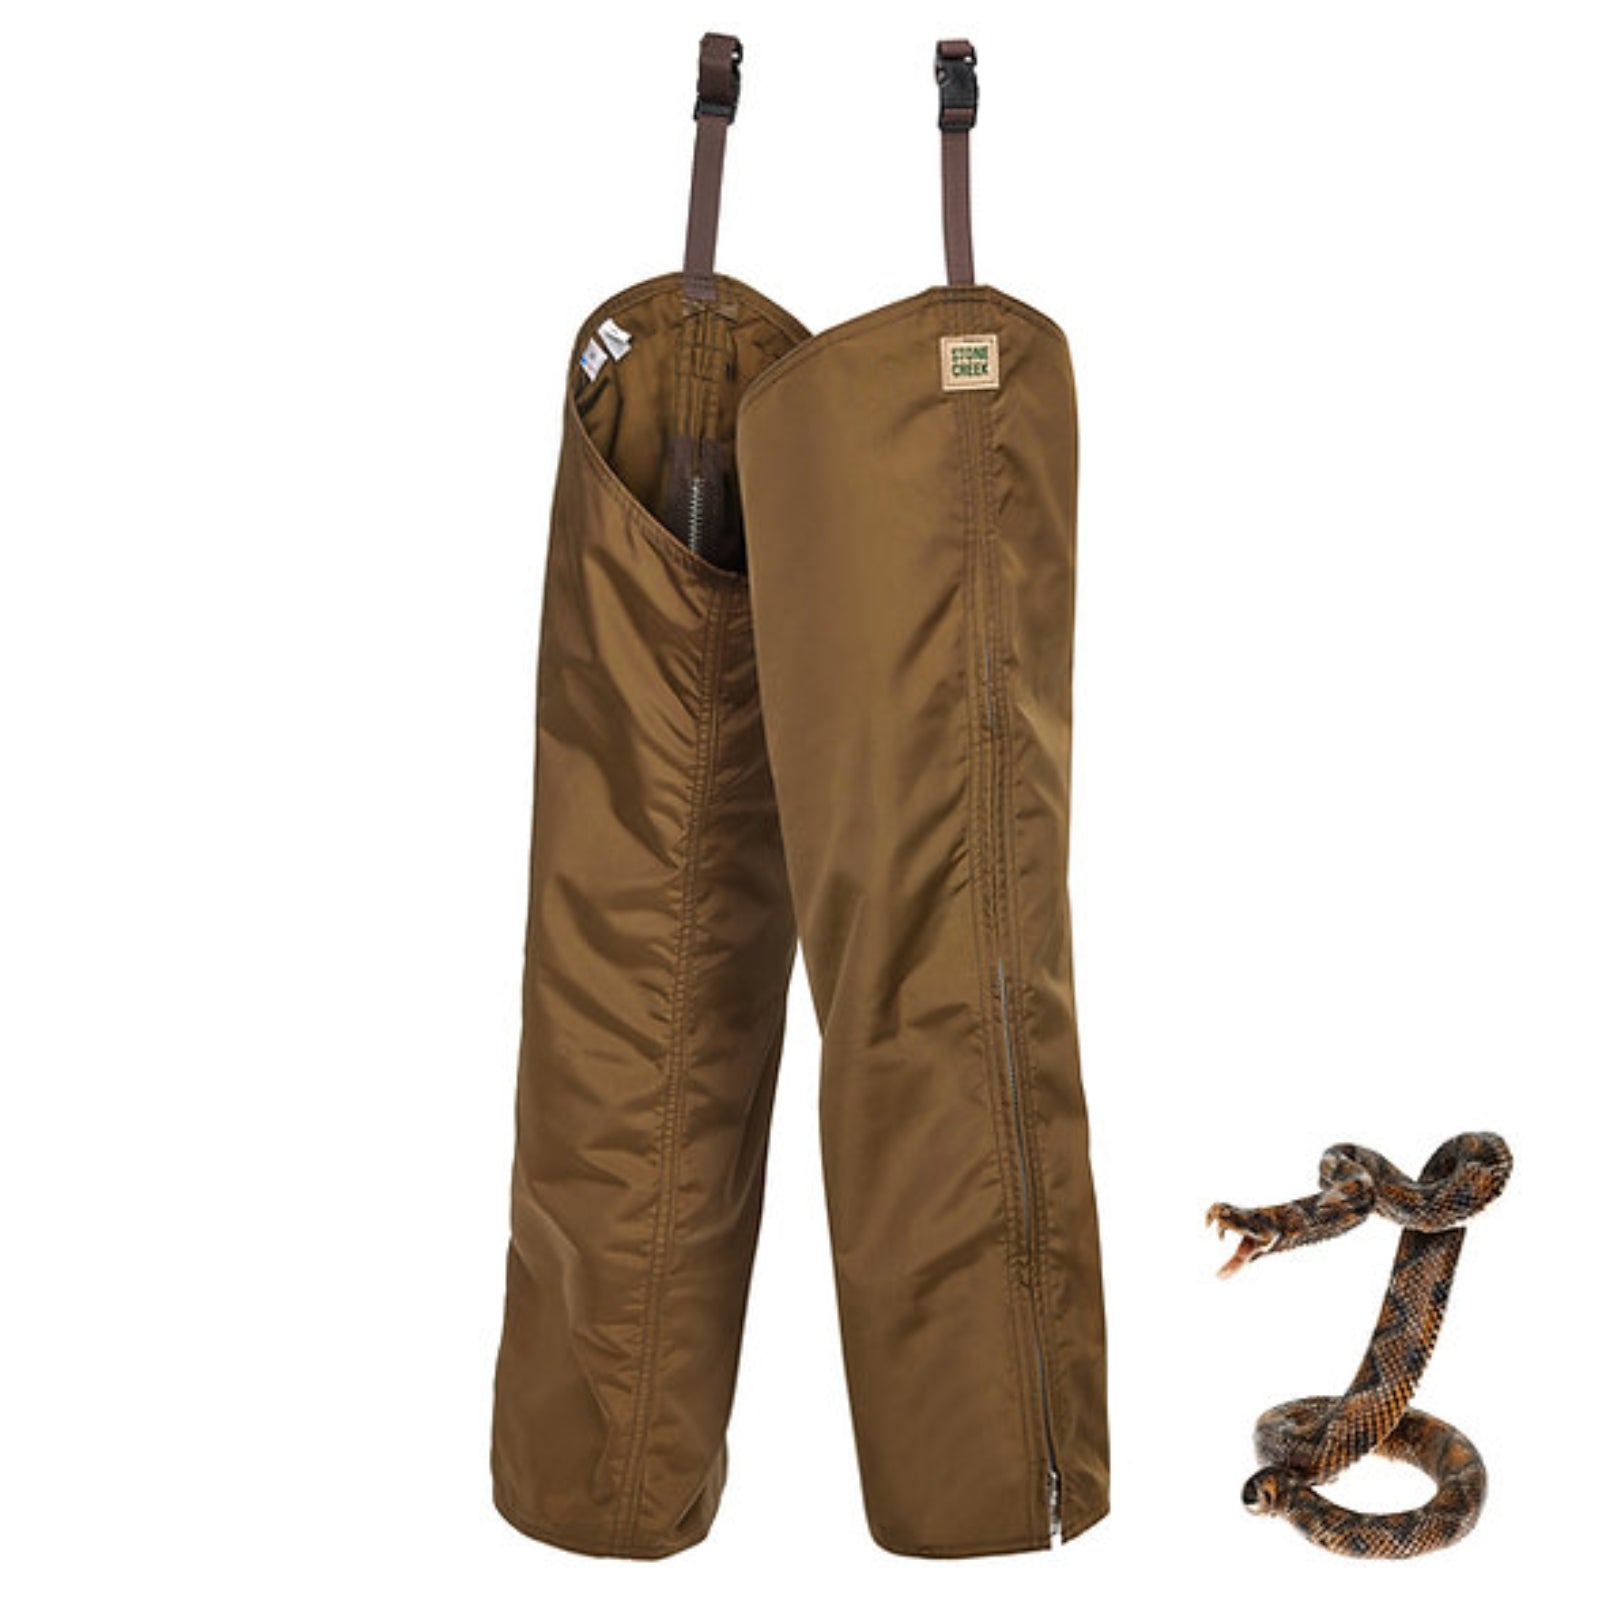 Stone Creek Snake Chaps - Full Protection